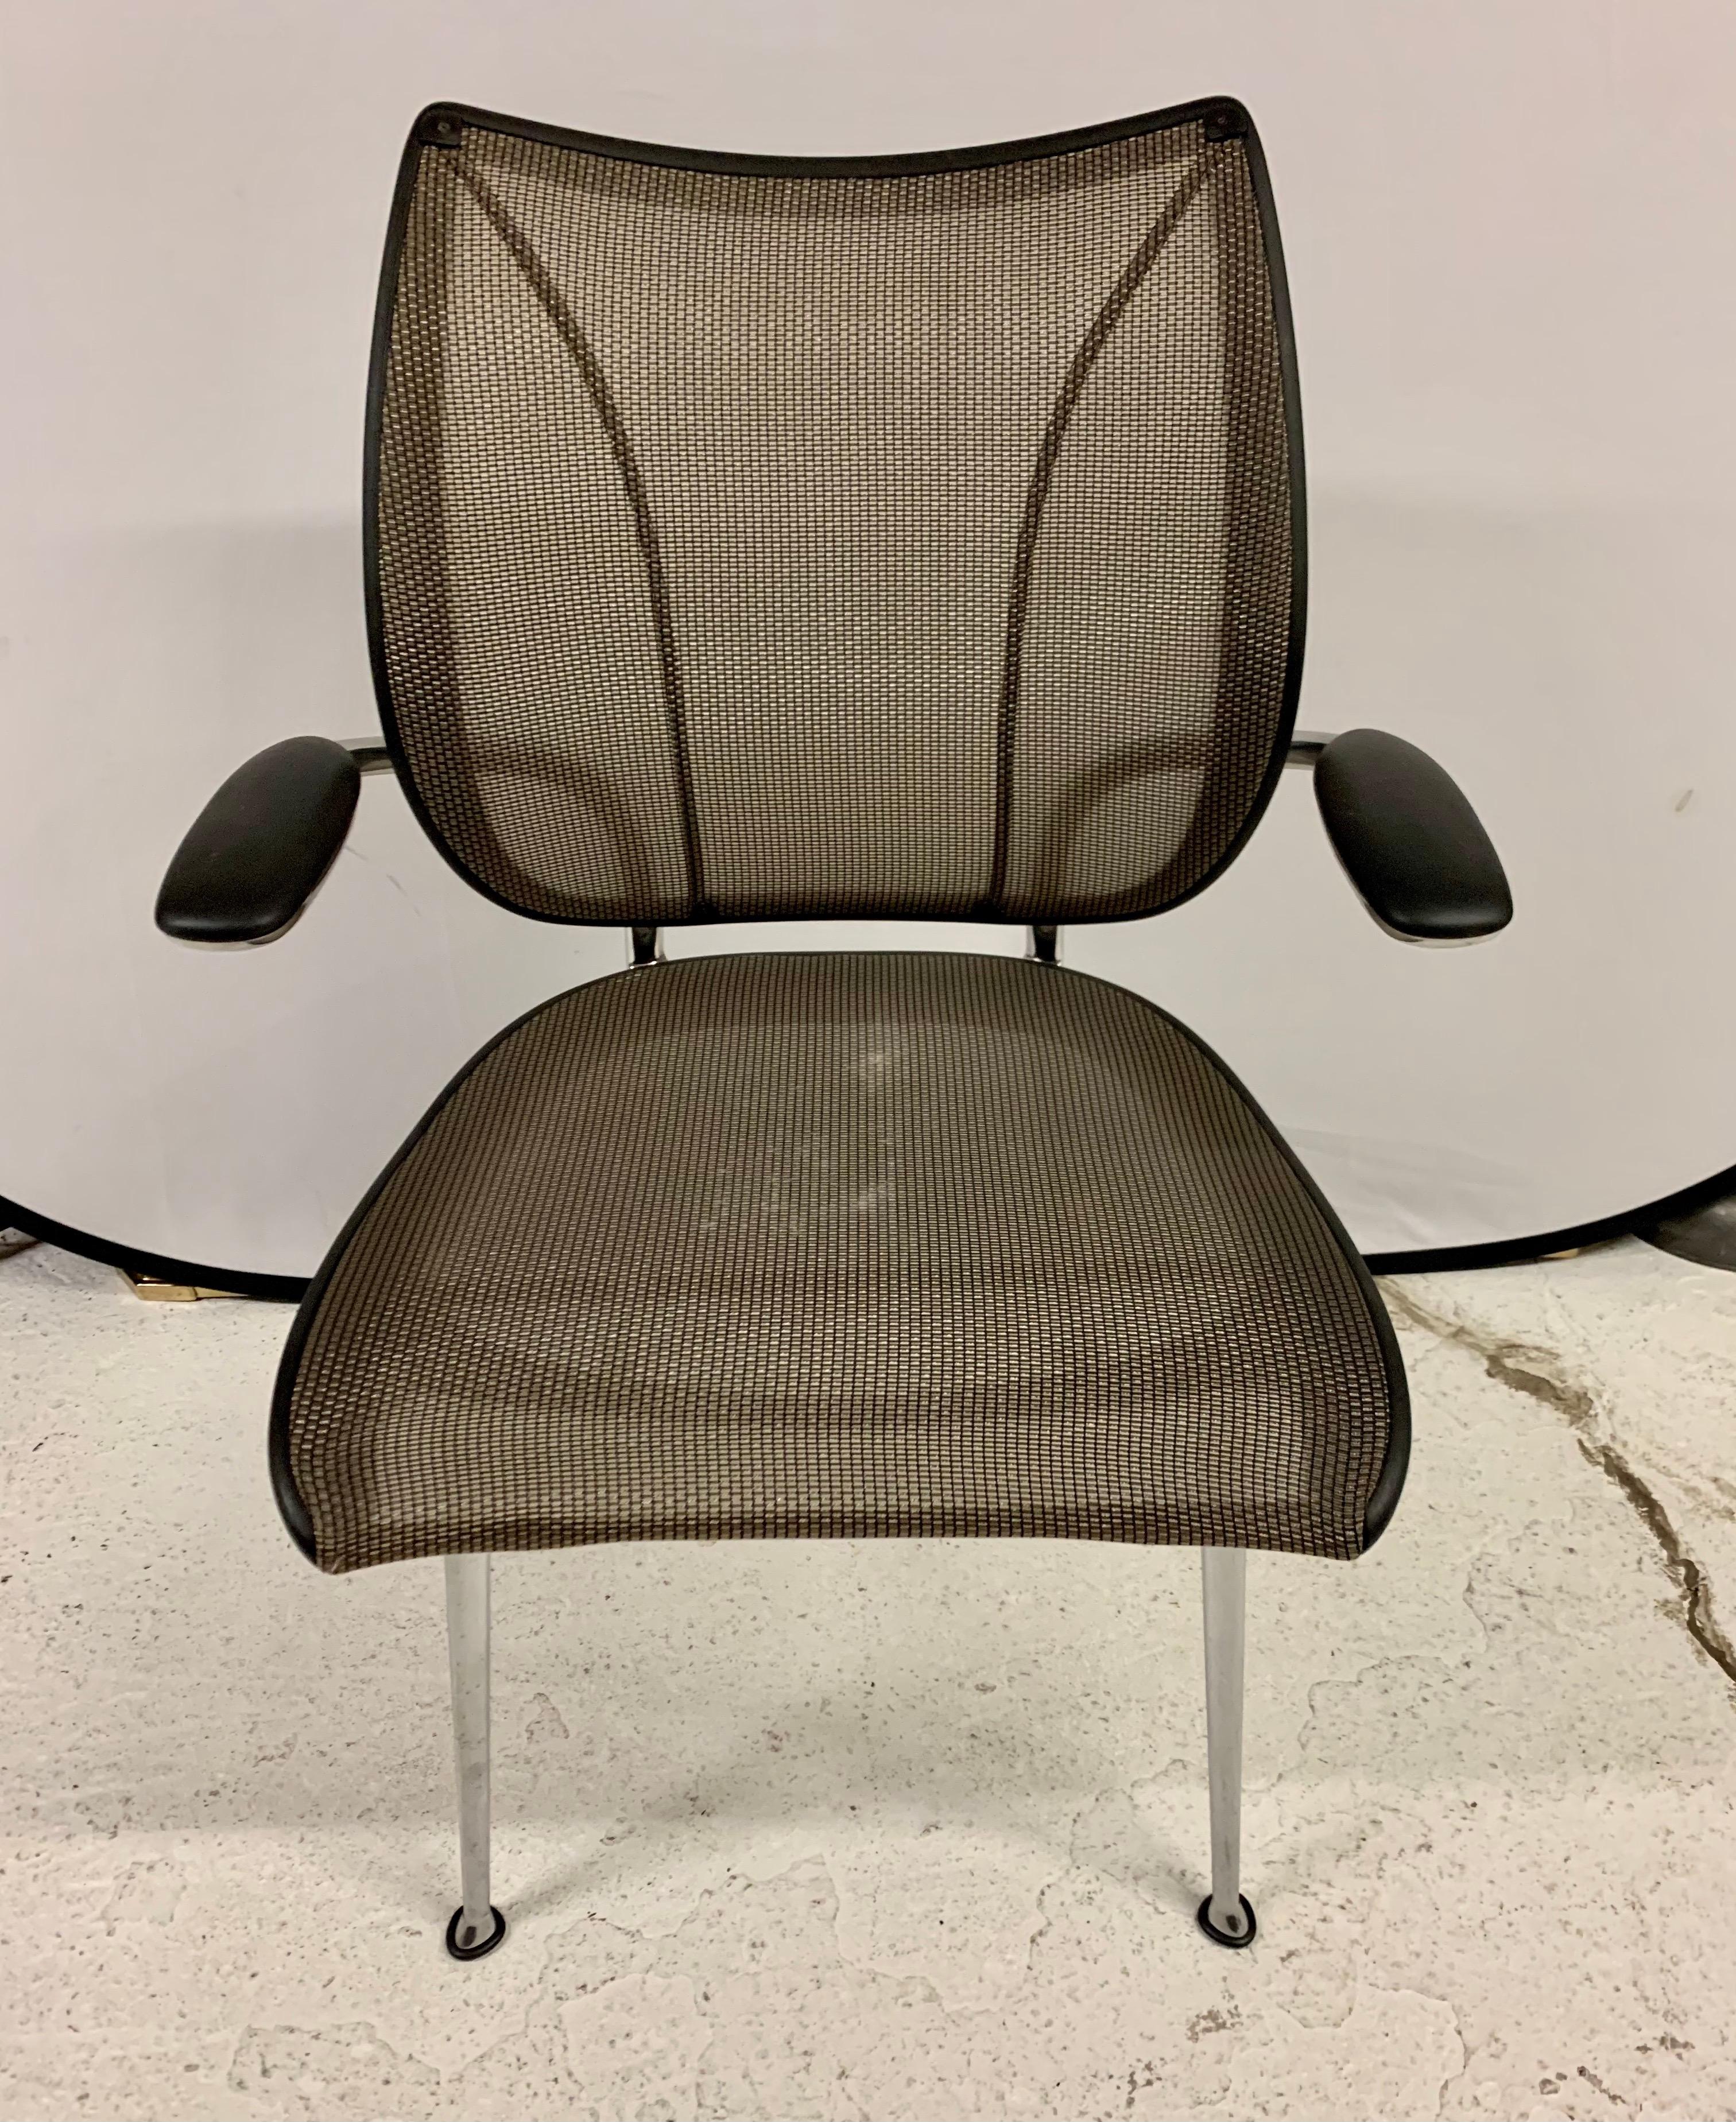 Iconic, Humanscale liberty side chair a best of NeoCon Gold Award winner offers beauty, performance and unprecedented. Designed to complement the styling and features of the Liberty task and conference chair the Humanscale liberty side chair